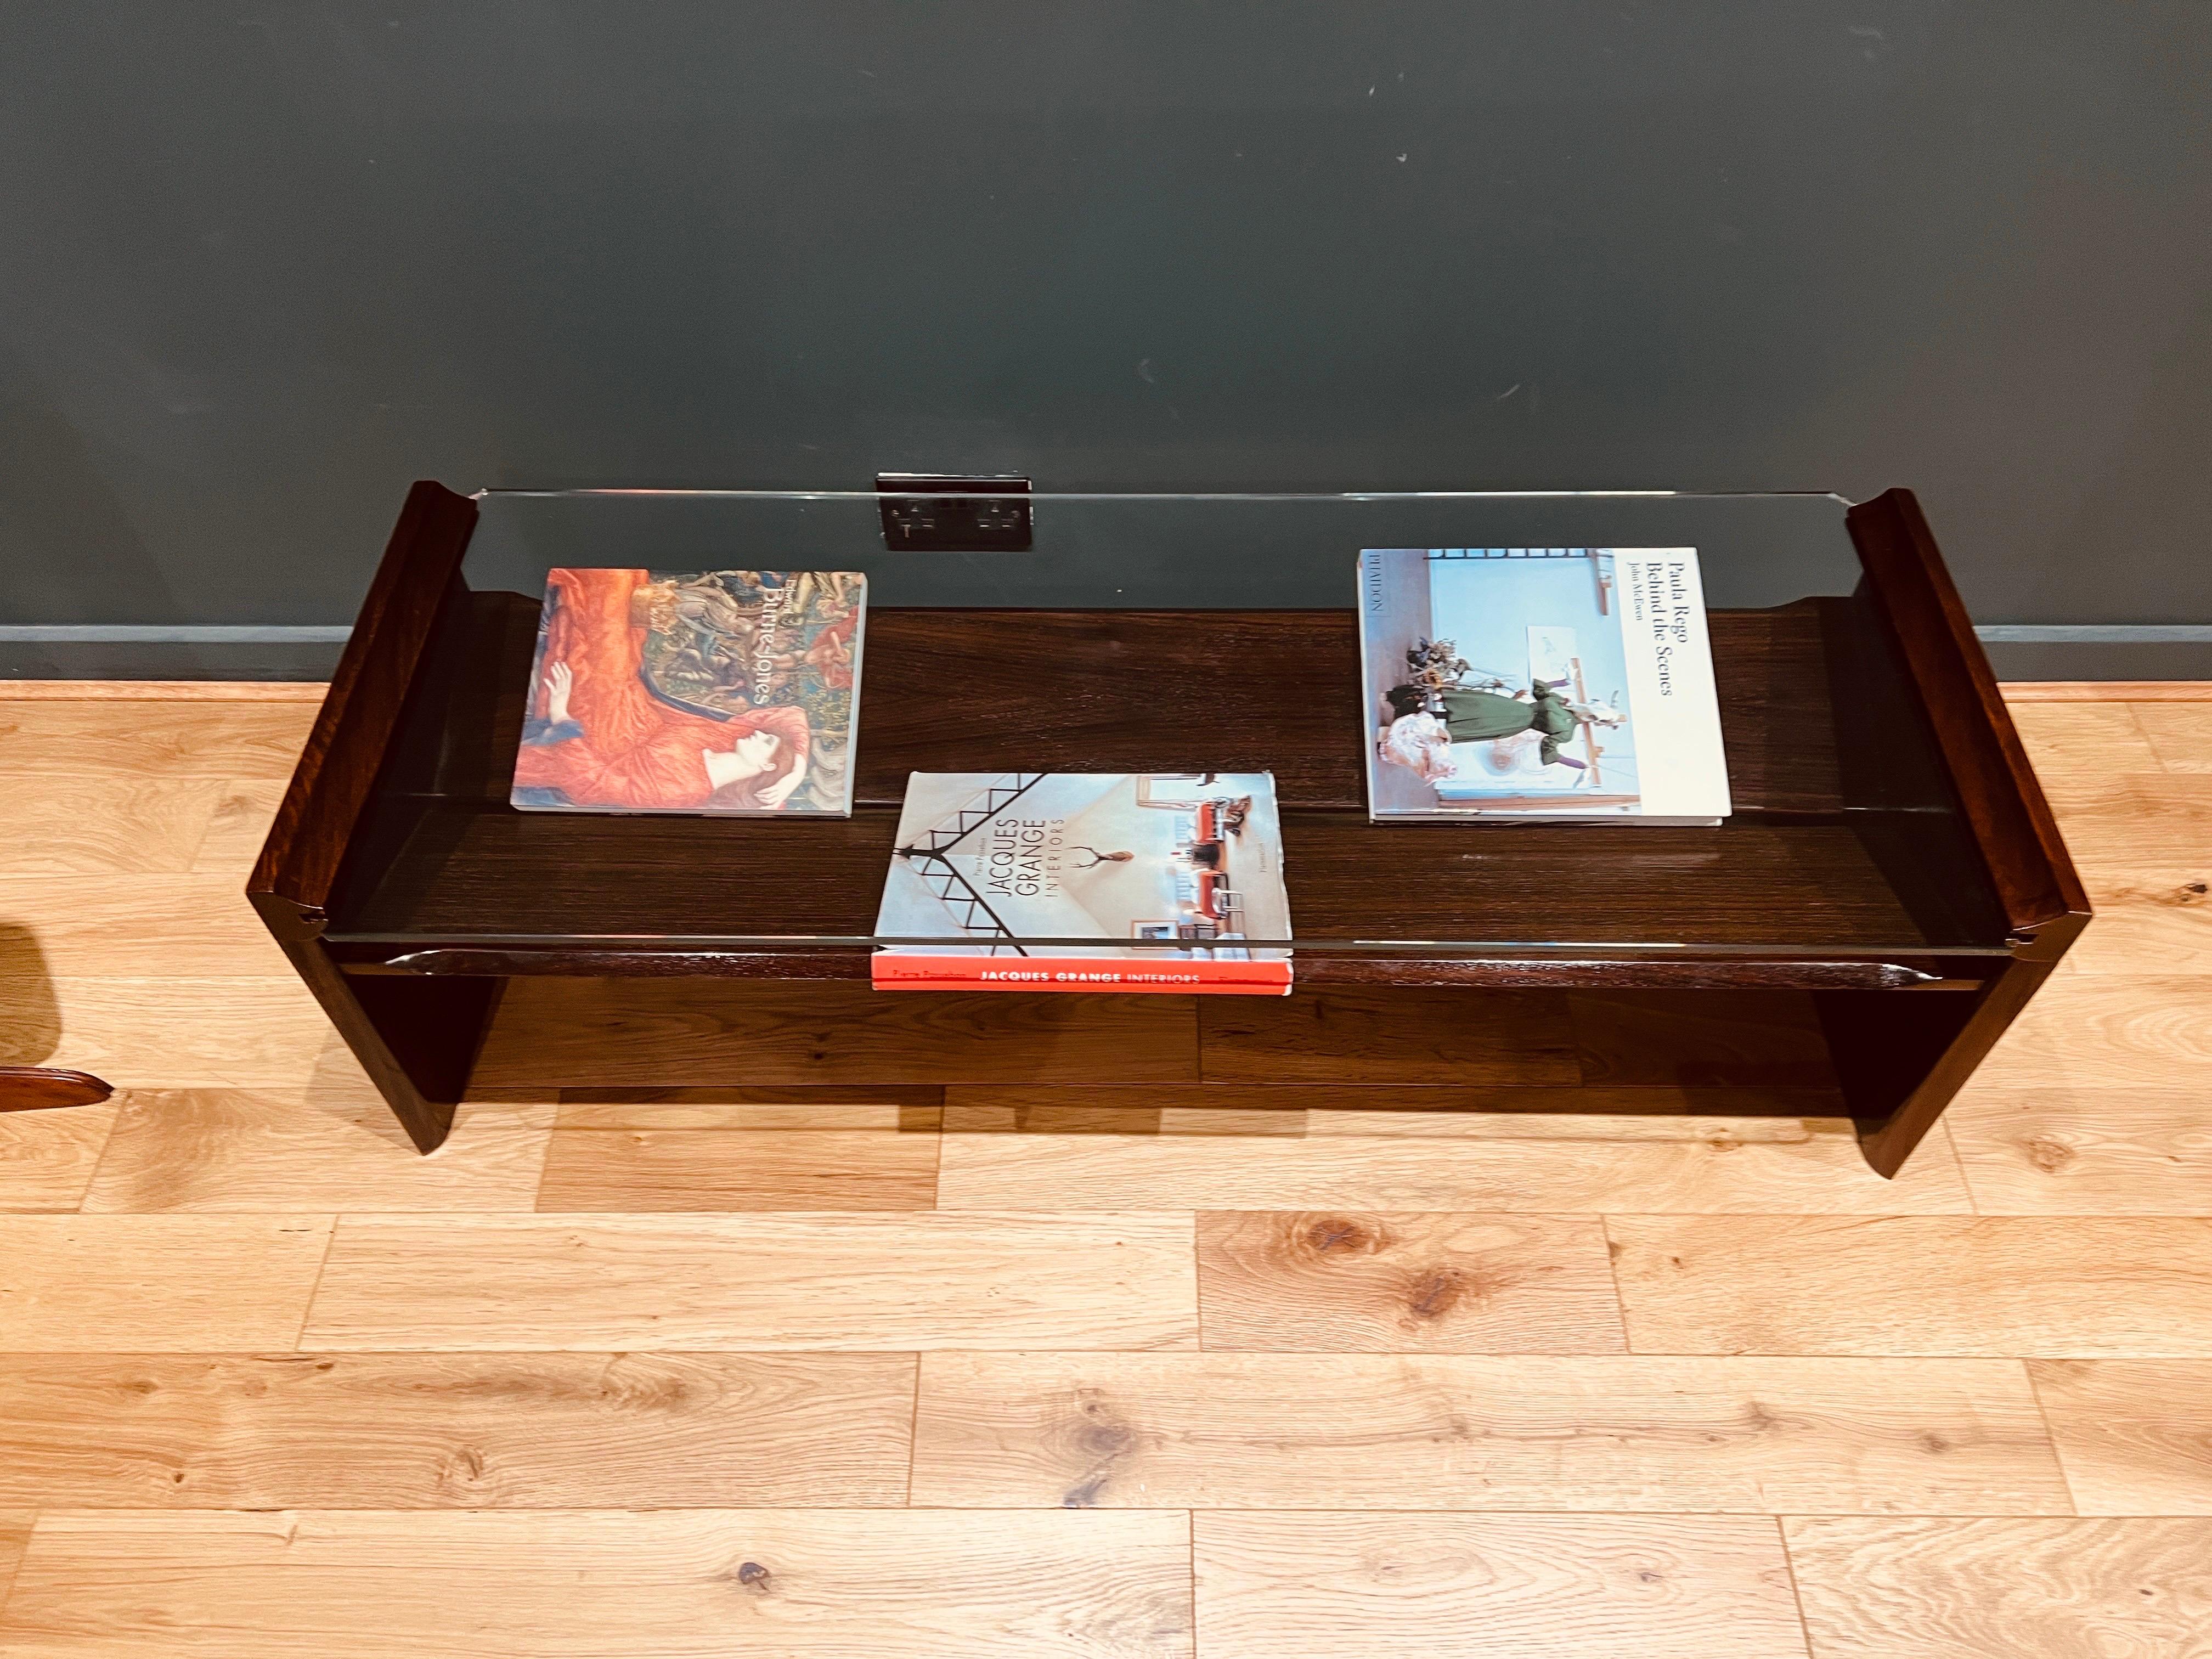 A fine rectangular dark wood veneer & cut glass top coffee table with two angled underlying wooden tops for books or magazines display.
Produced in Italy, circa 1960s.